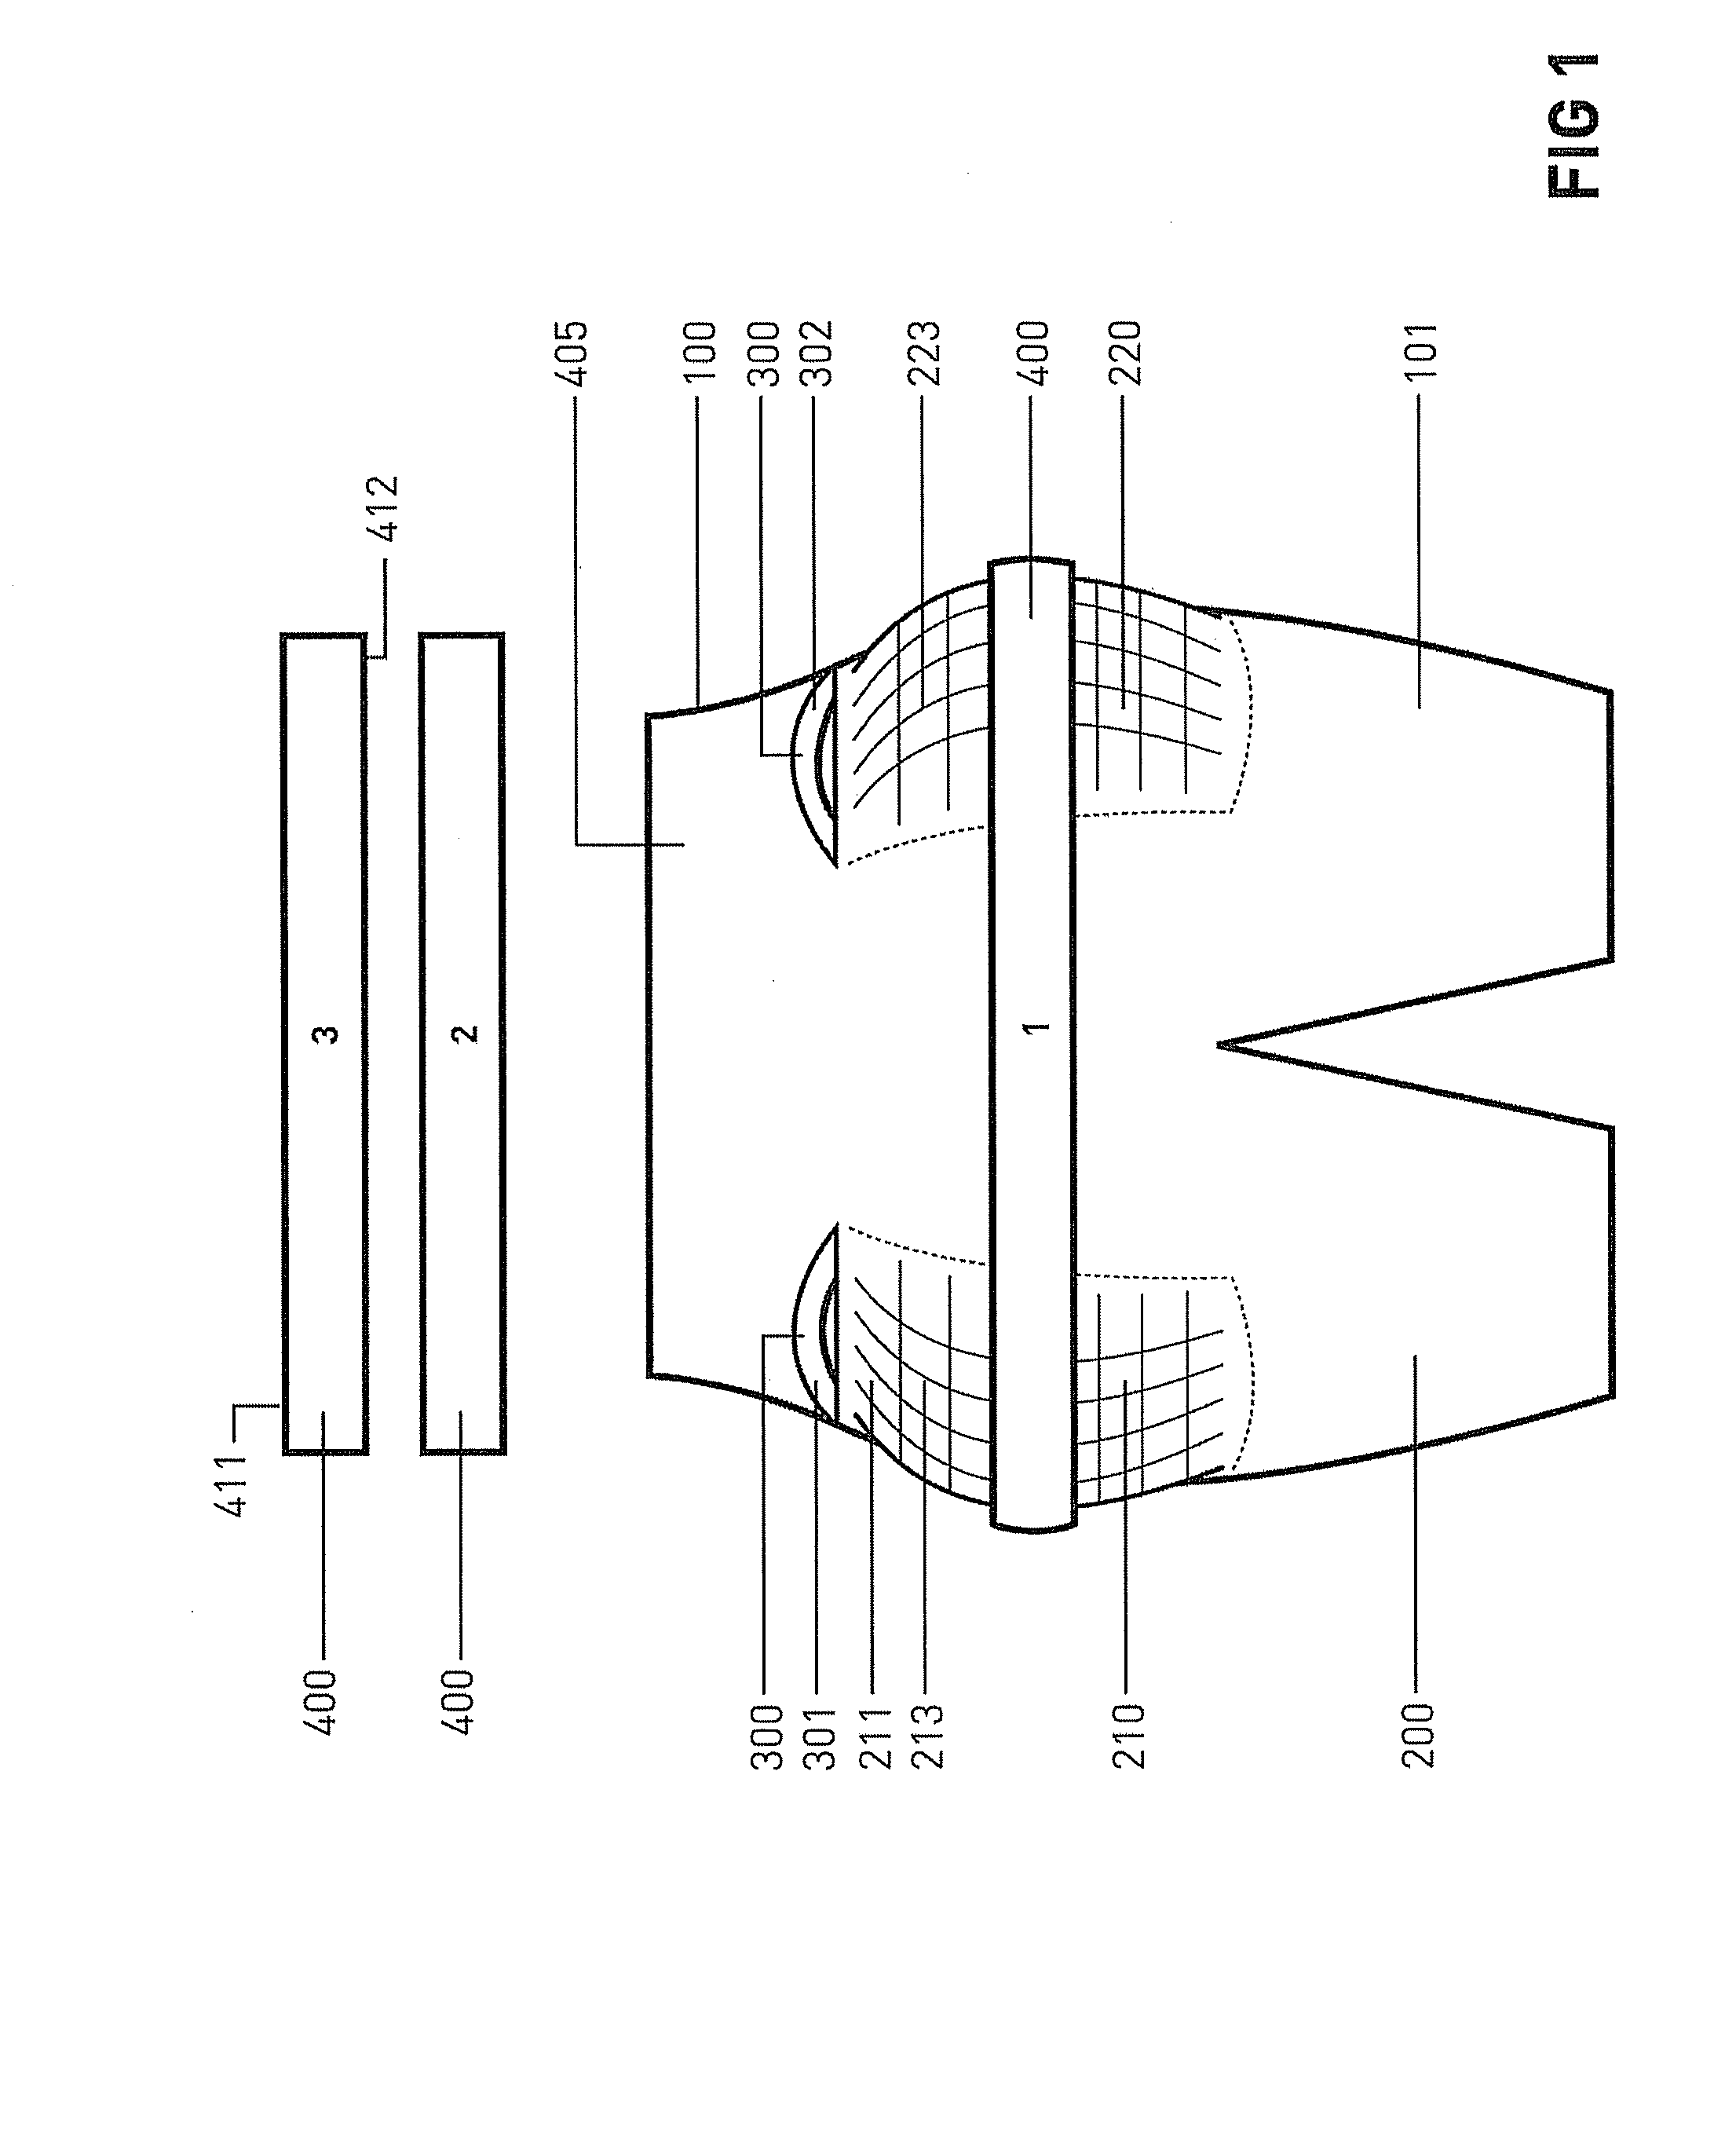 Compression undergarment for relief of menstrual pain and related method of use